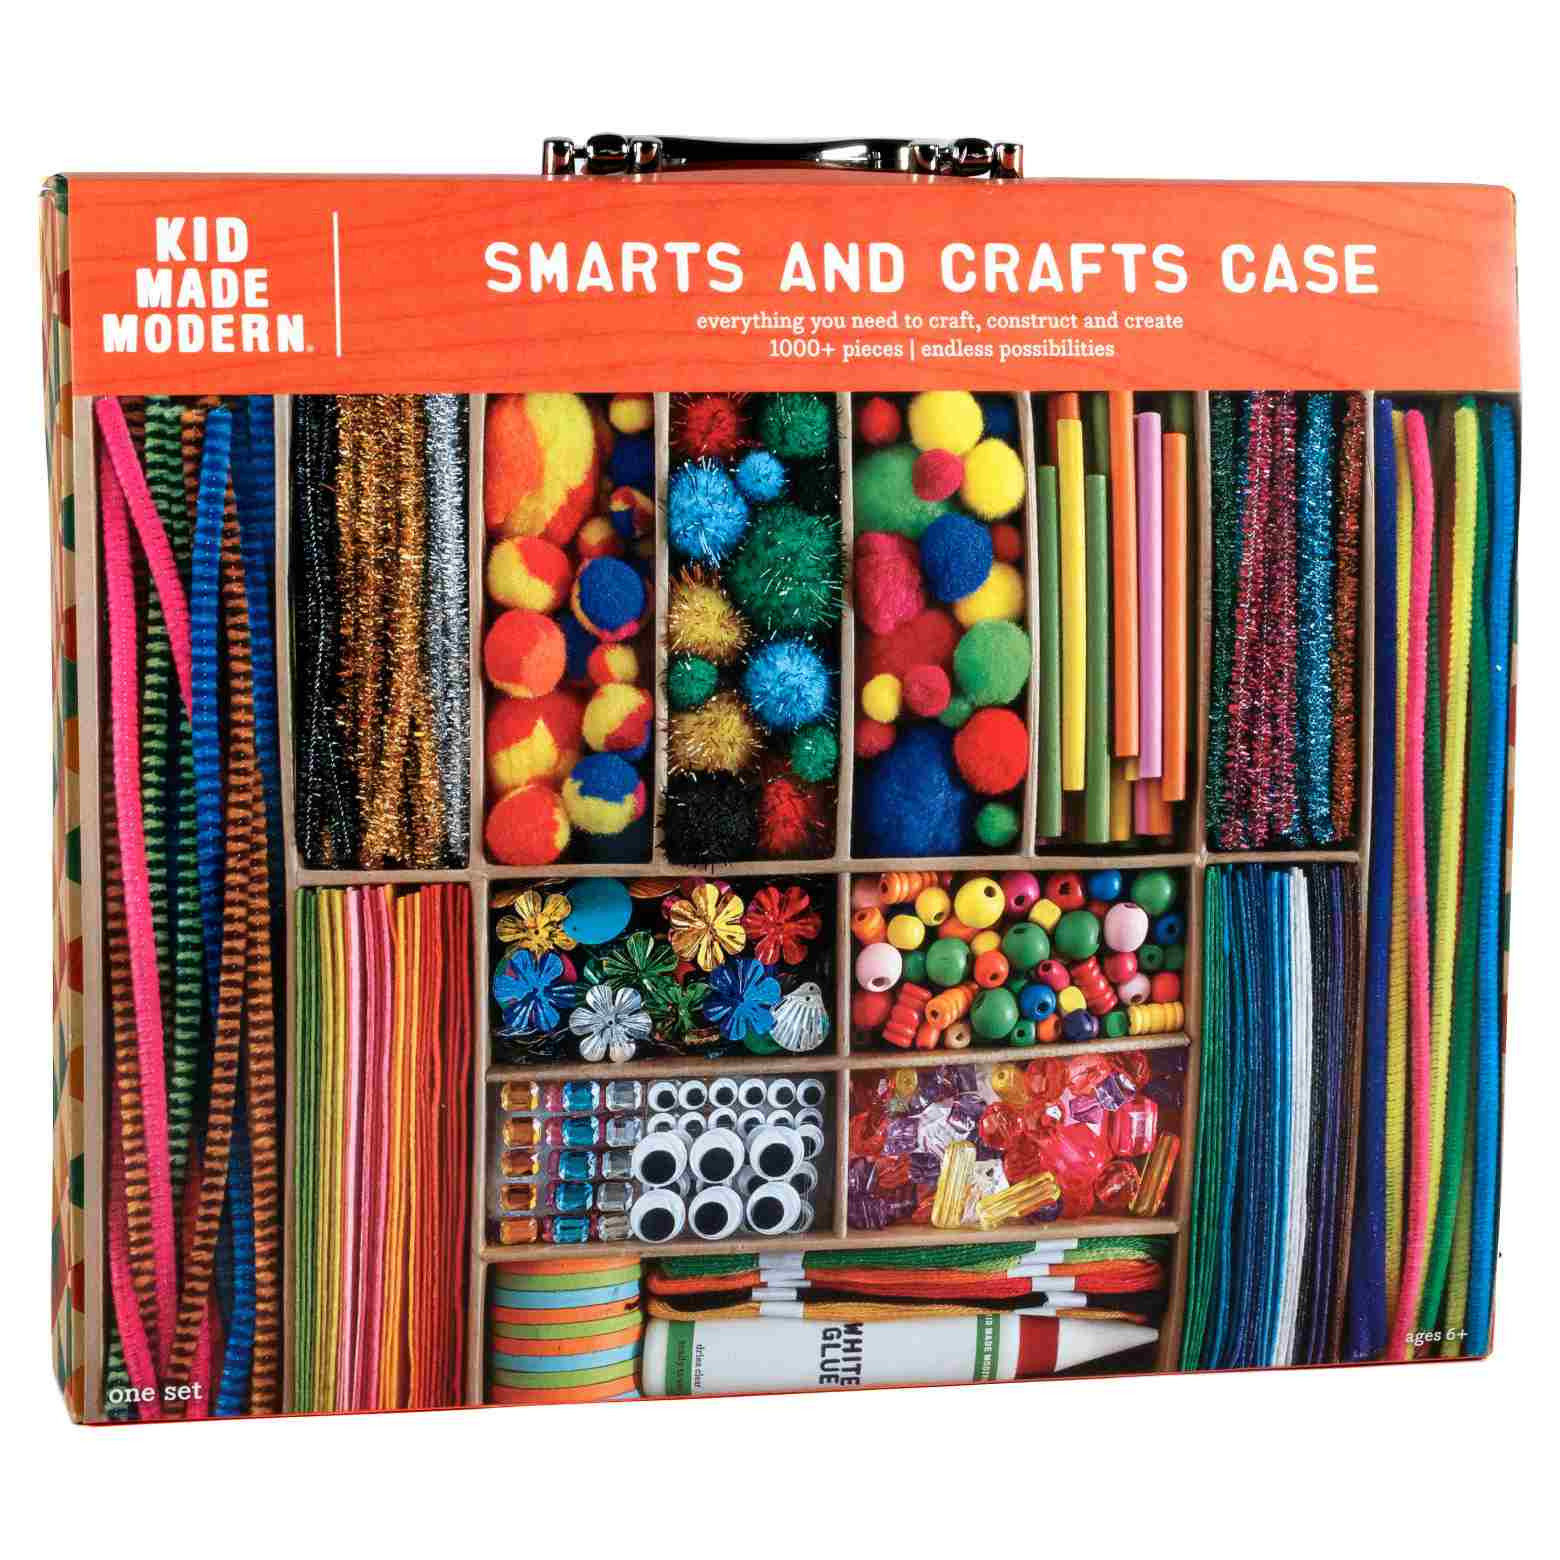 Arts And Crafts Kits For Kids
 The 9 Best Craft Kits for Kids in 2020